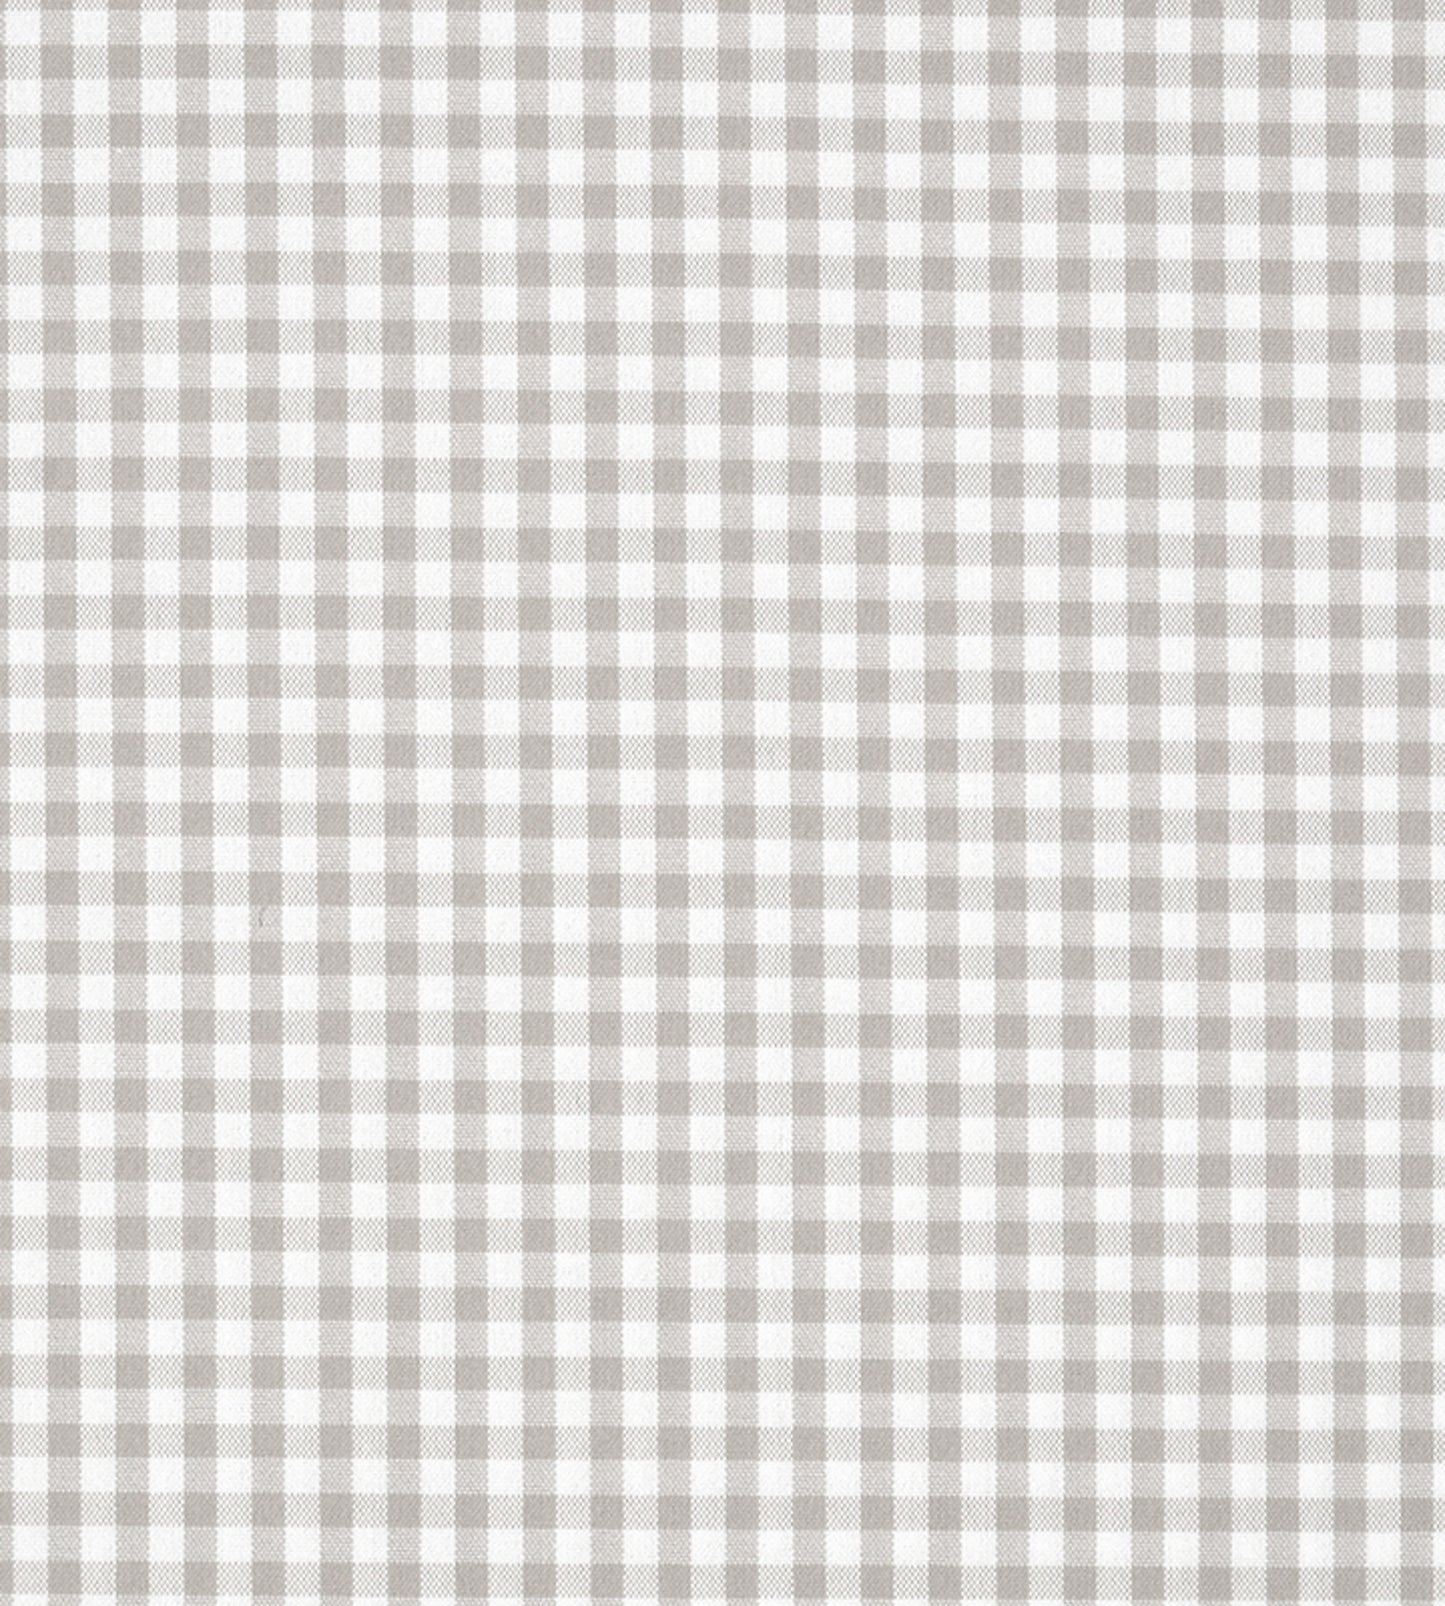 Purchase Old World Weavers Fabric Product# F3 00143018, Poker Check Light Grey 1